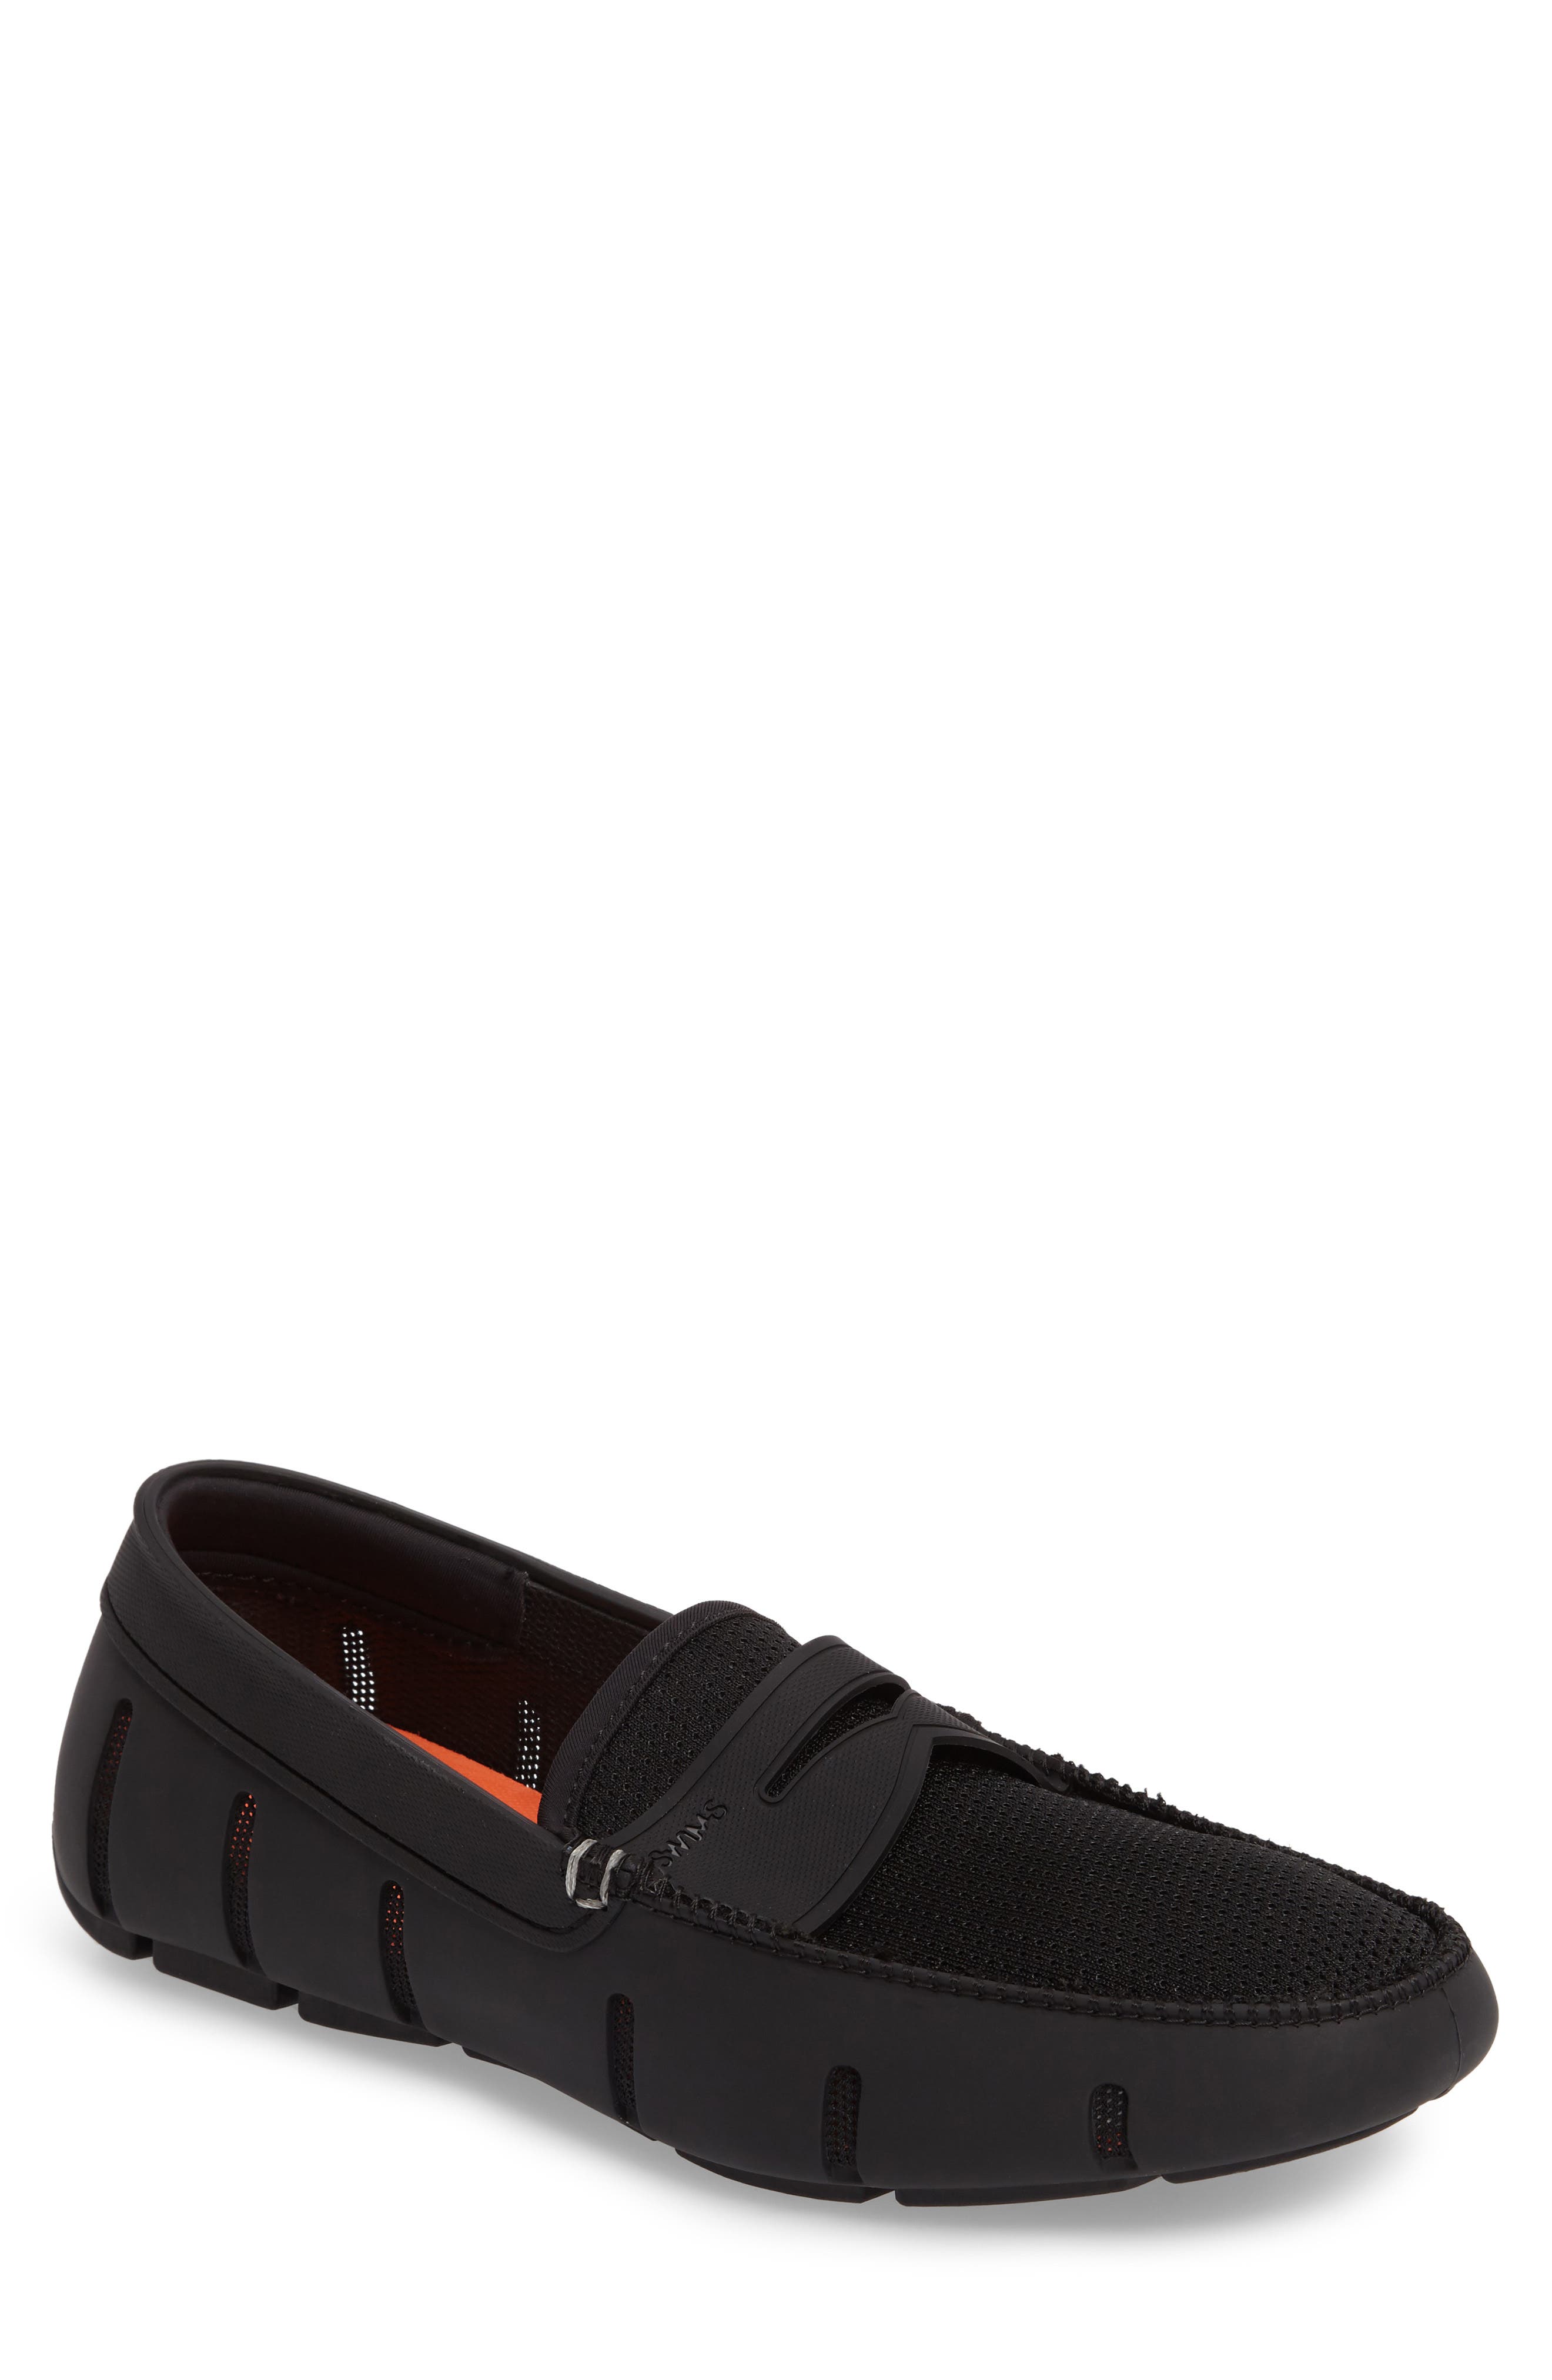 swims black loafers